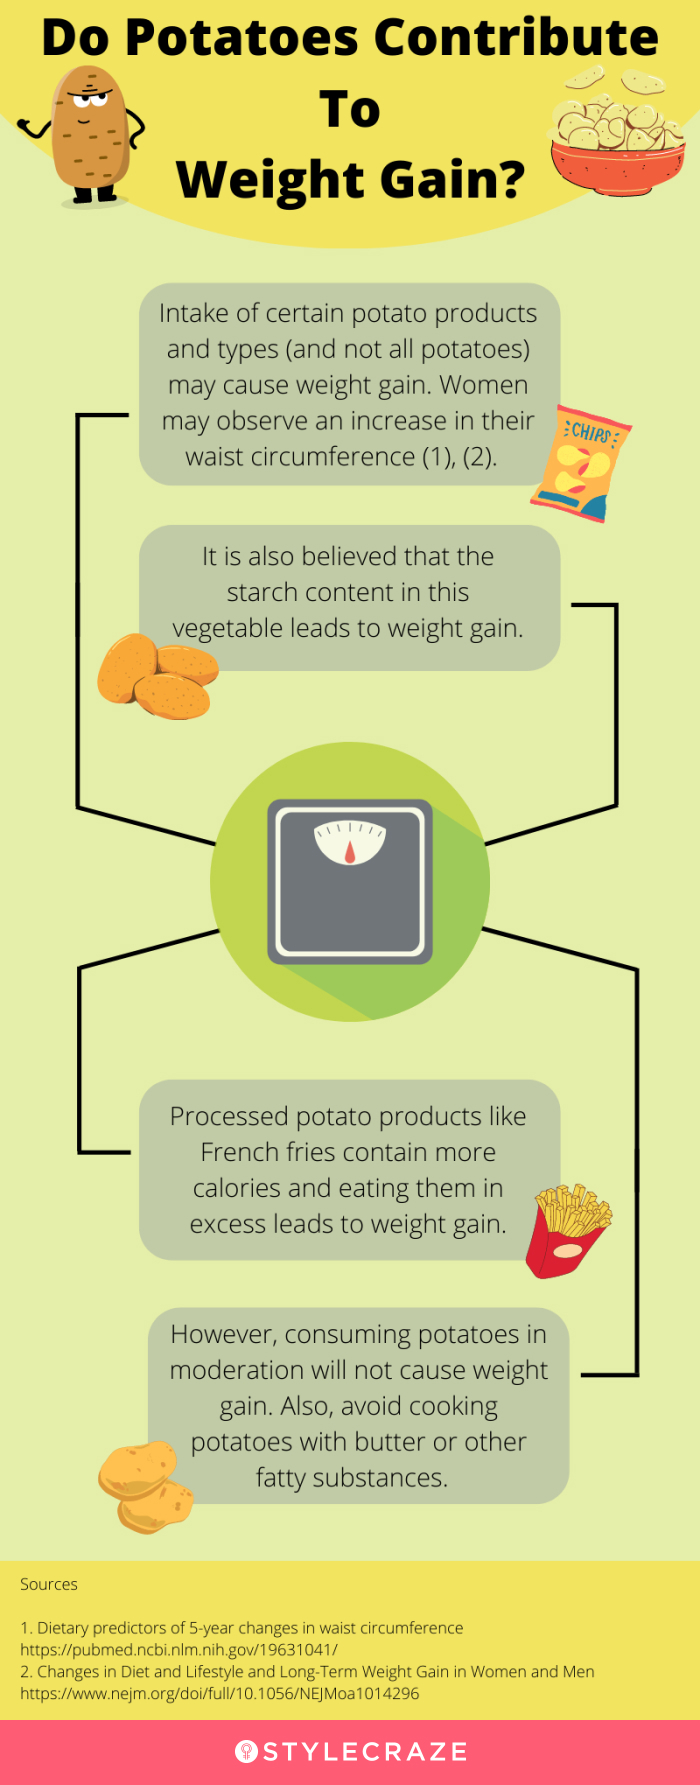 do potatoes contribute to weight gain (infographic)